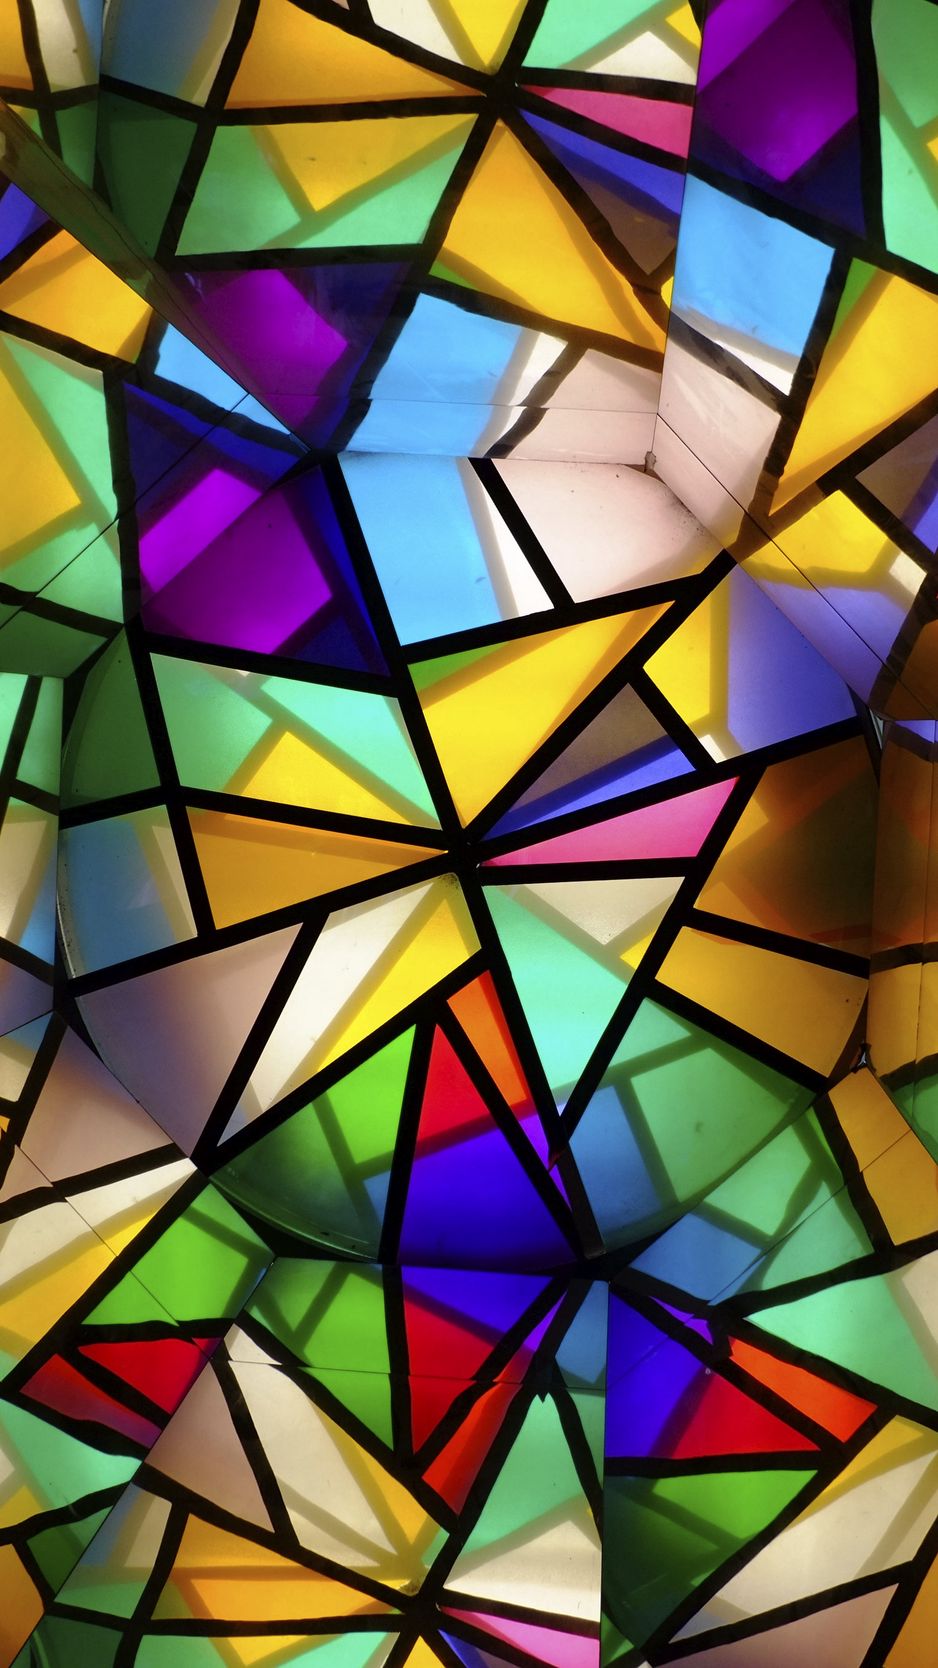 Download wallpaper 938x1668 stained glass, colorful, glass fragments iphone  8/7/6s/6 for parallax hd background